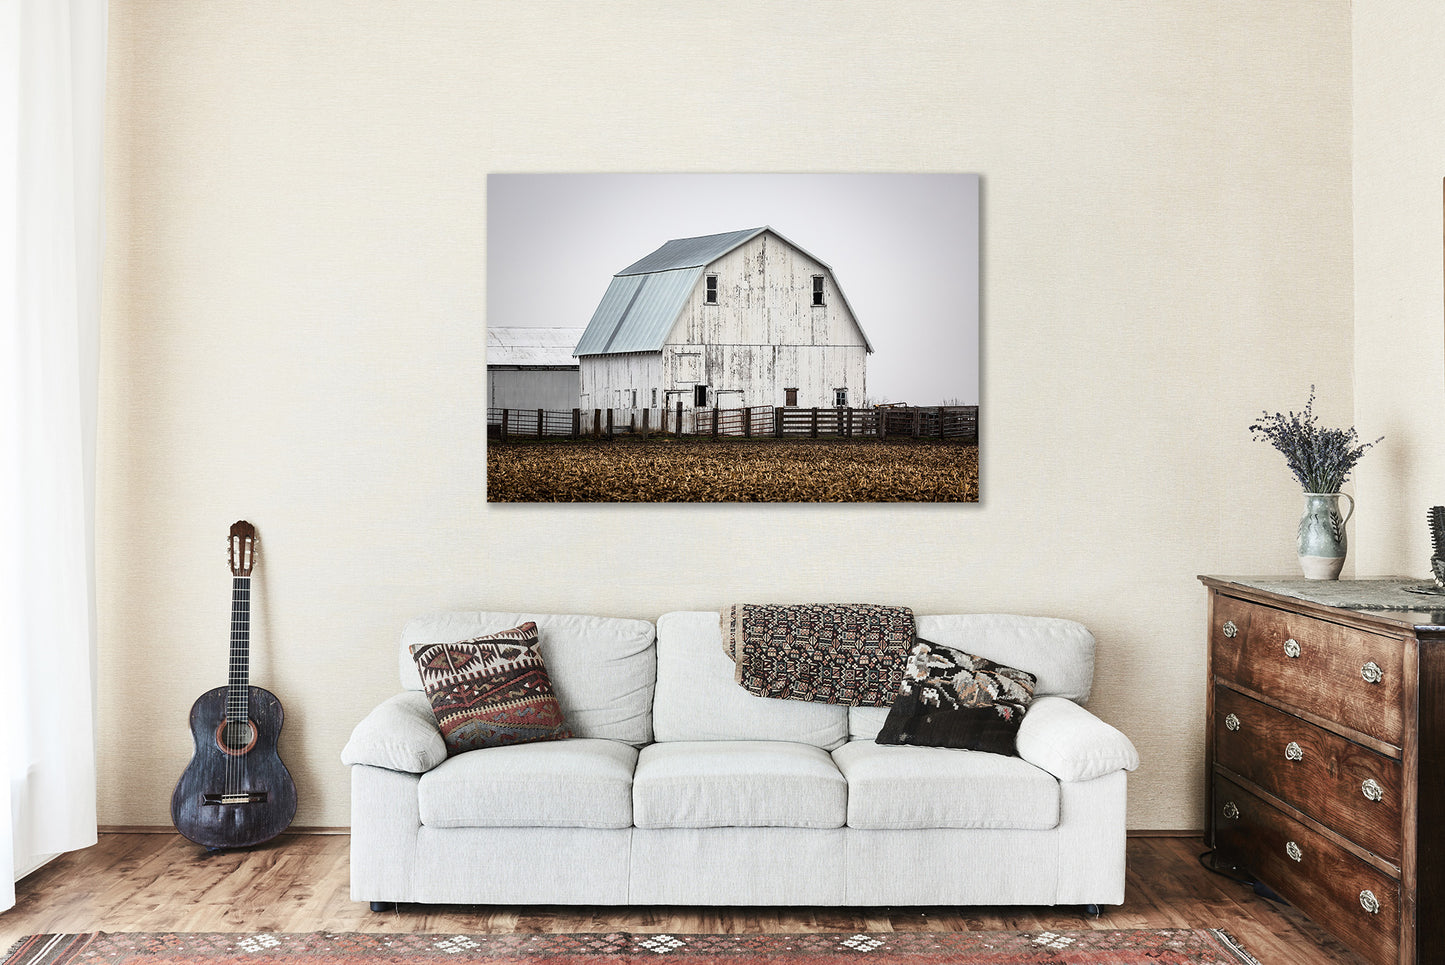 Canvas Wall Art - Gallery Wrap of Rustic White Barn on Spring Morning in Illinois - Country Farmhouse Photography Artwork Photo Decor